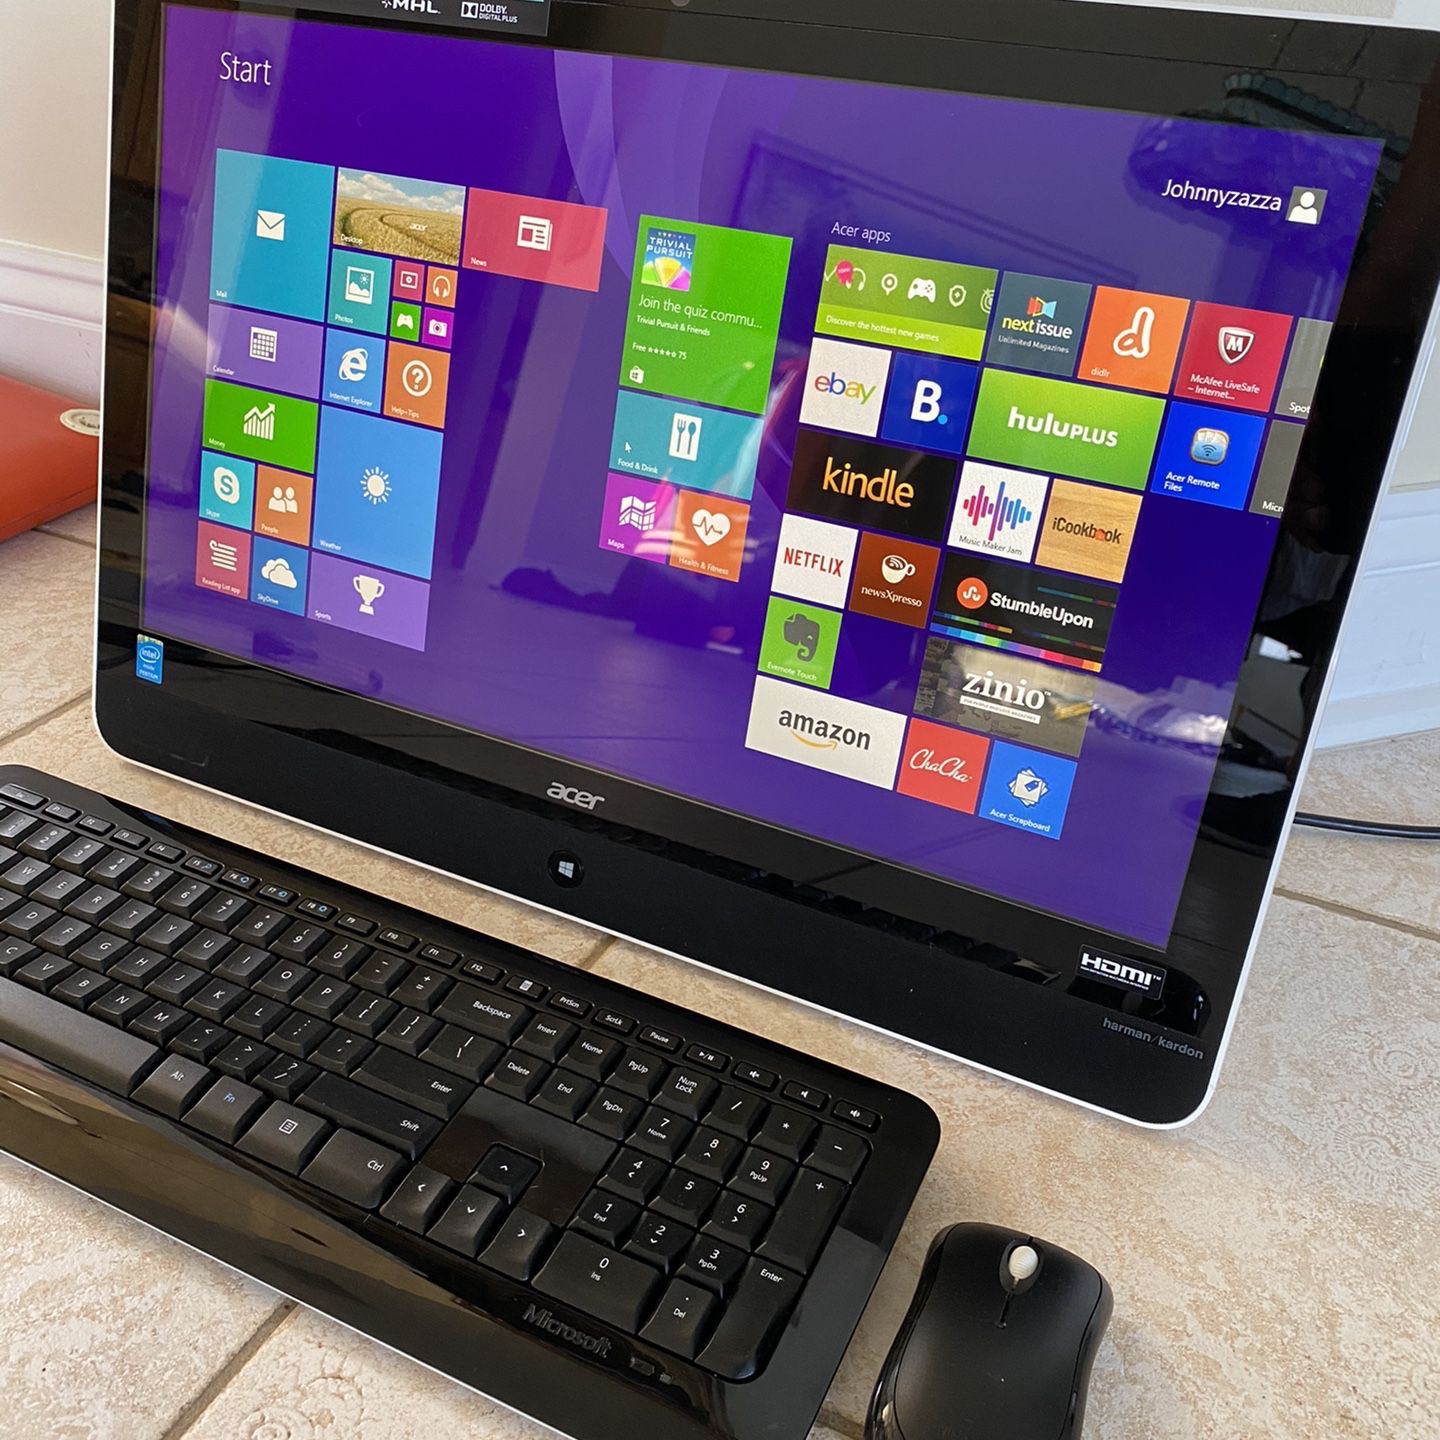 ACER ALL IN ONE WIRELESS COMPUTER WINDOWS 8